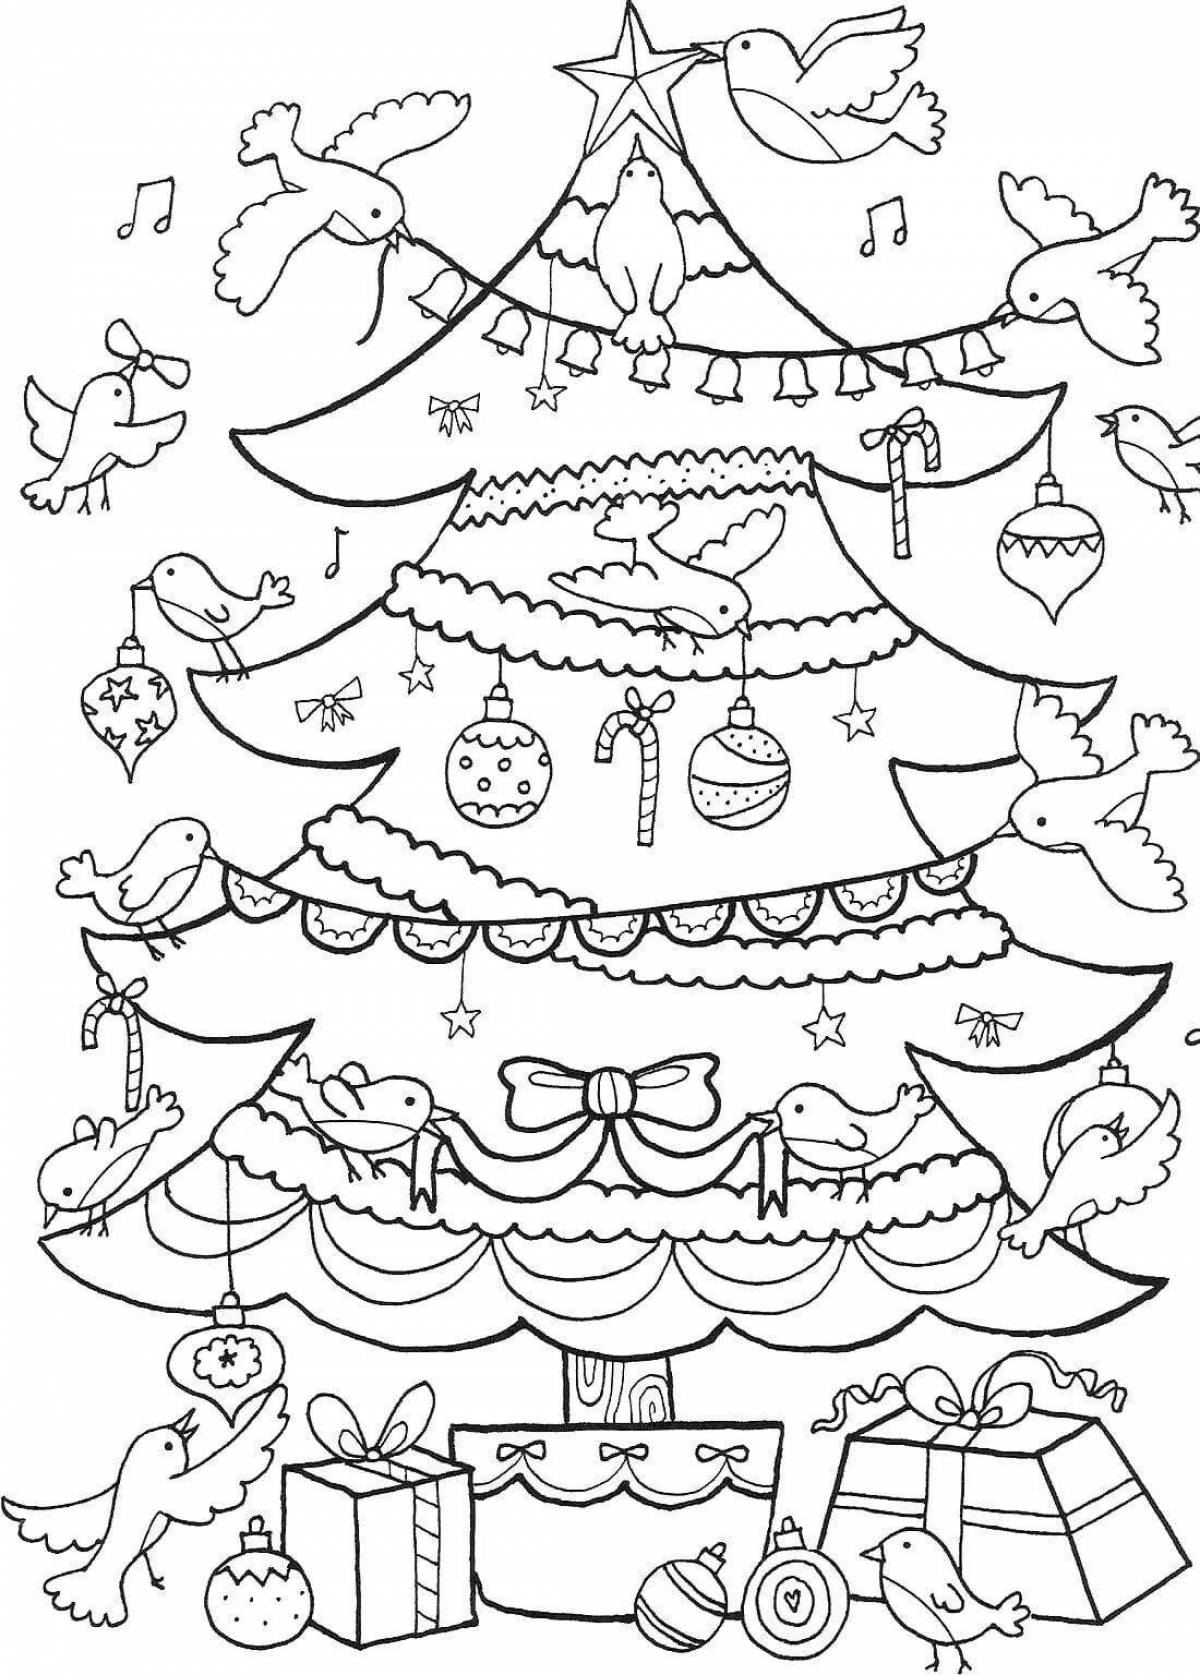 Adorable Christmas tree coloring book for 5-6 year olds